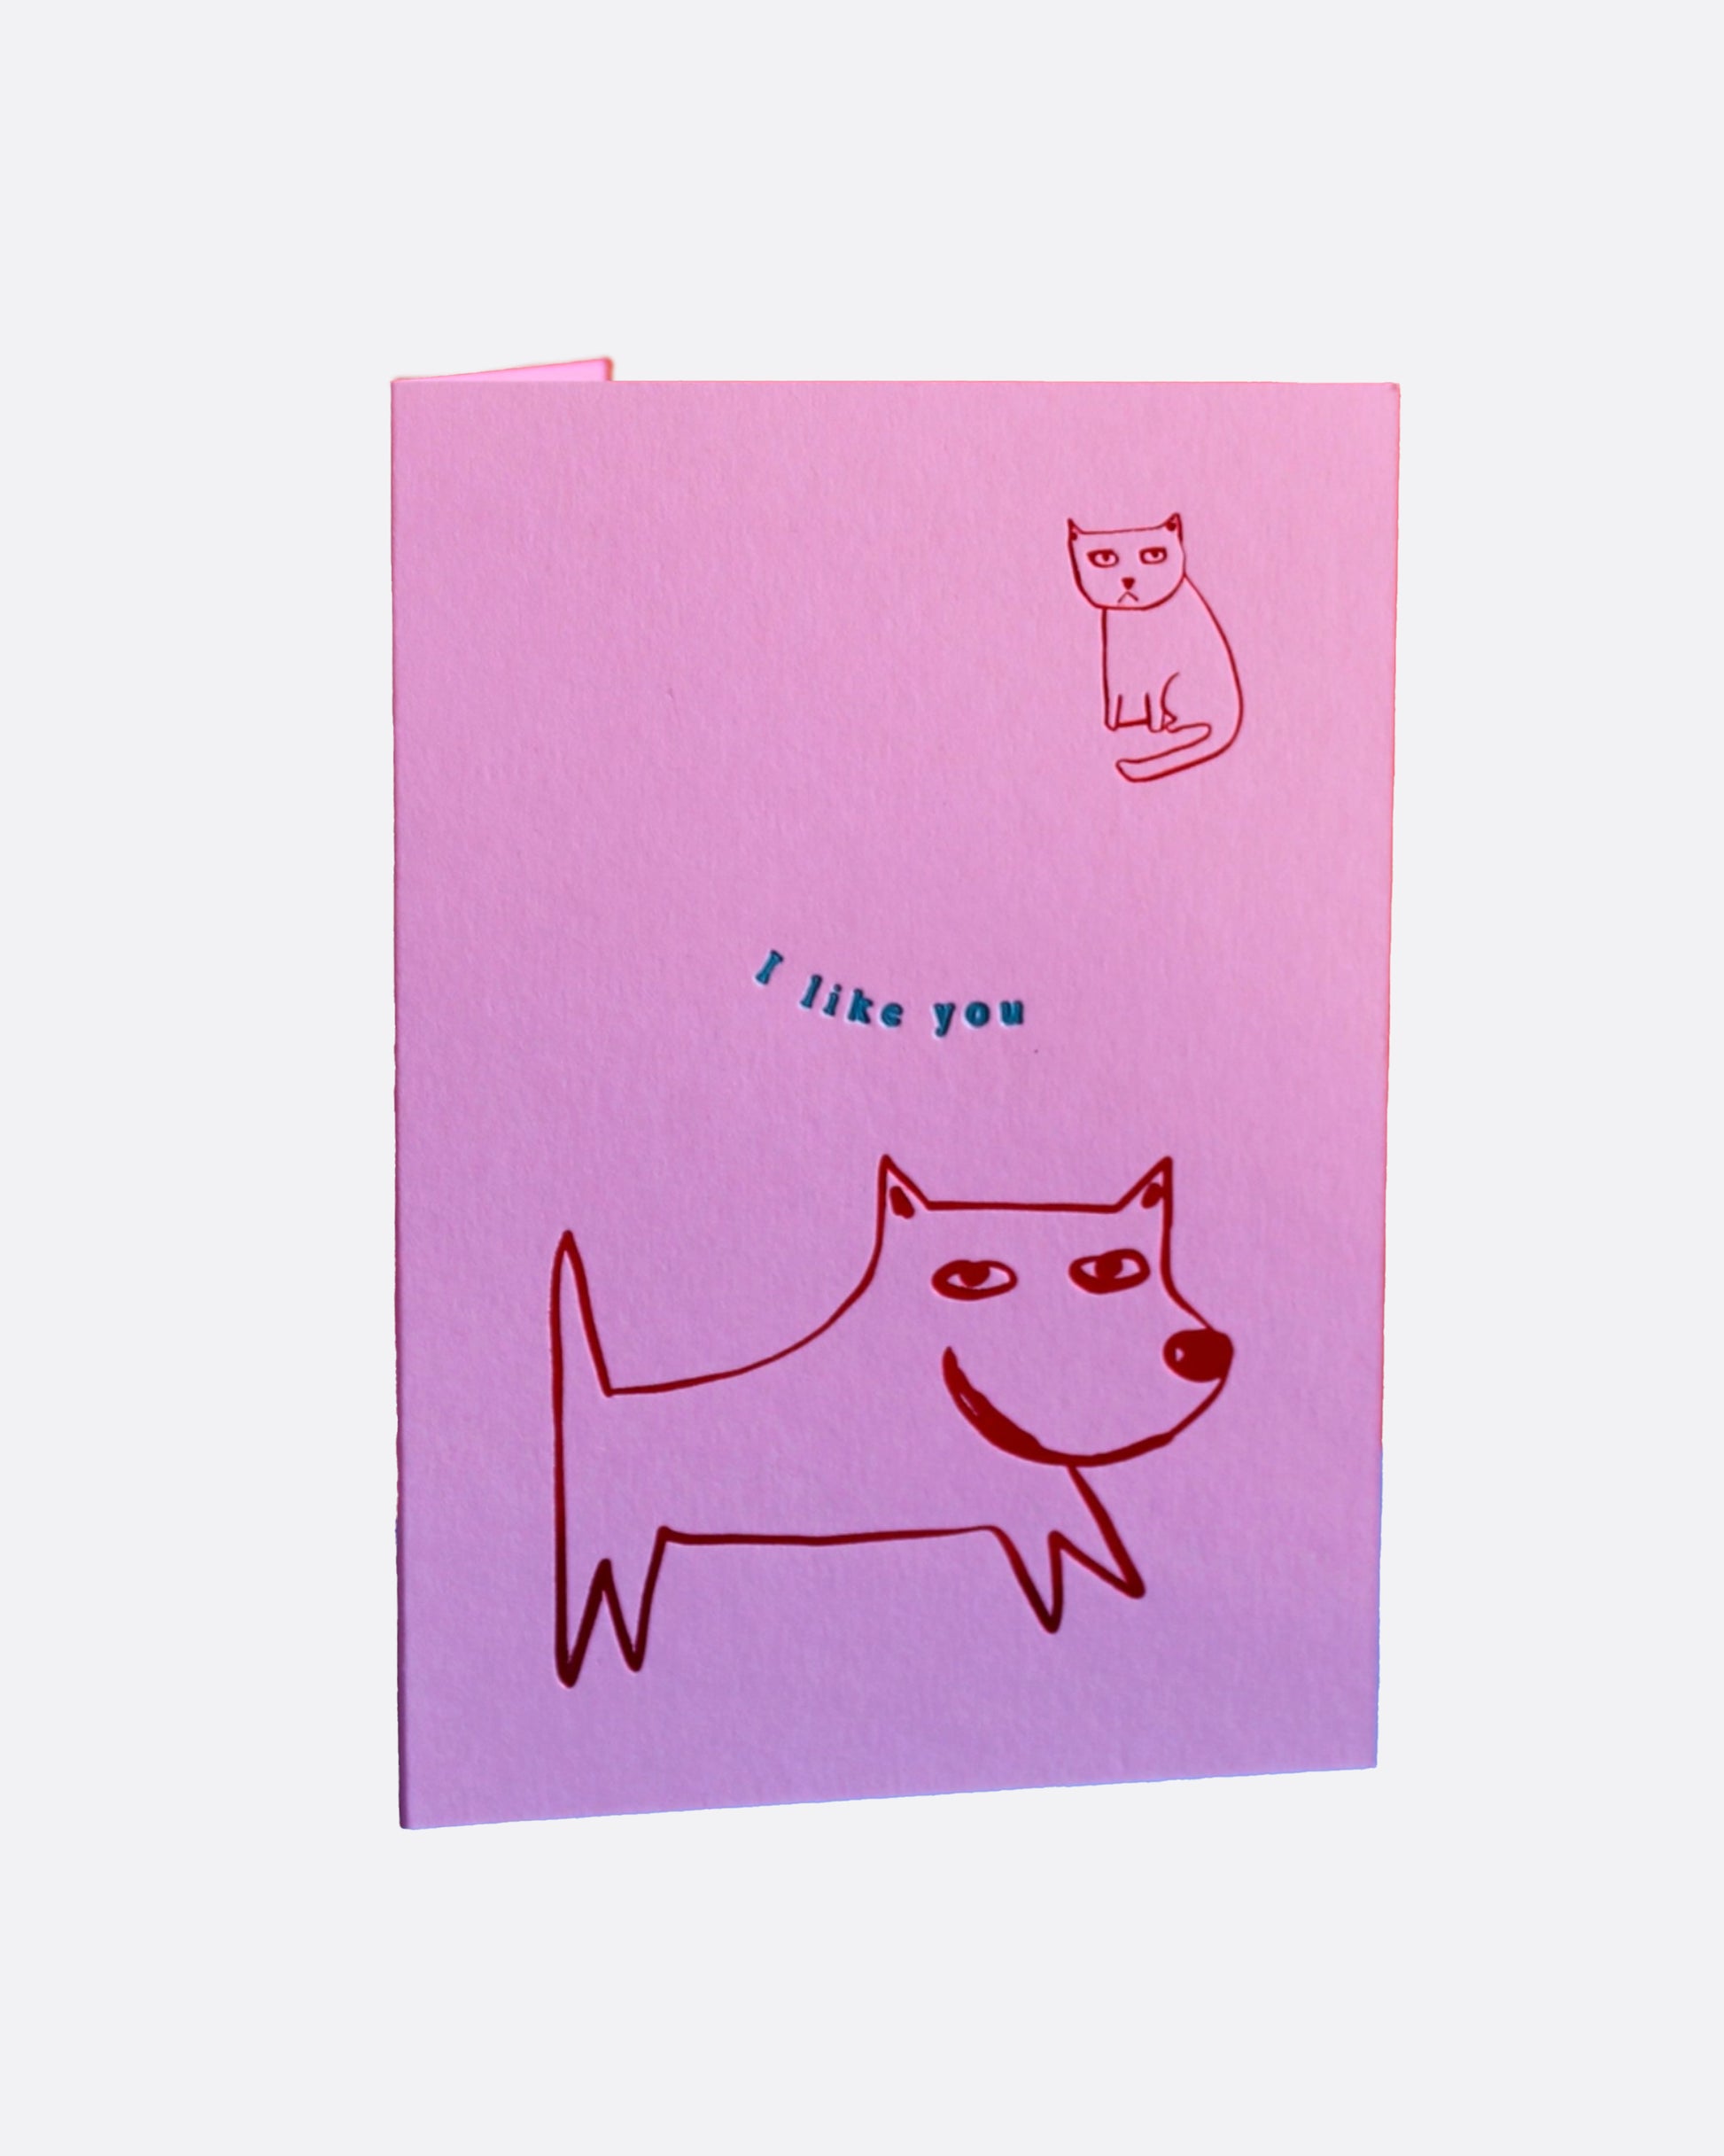 A simple phrase is sometimes all you need; this card says it with foil embossed friends.